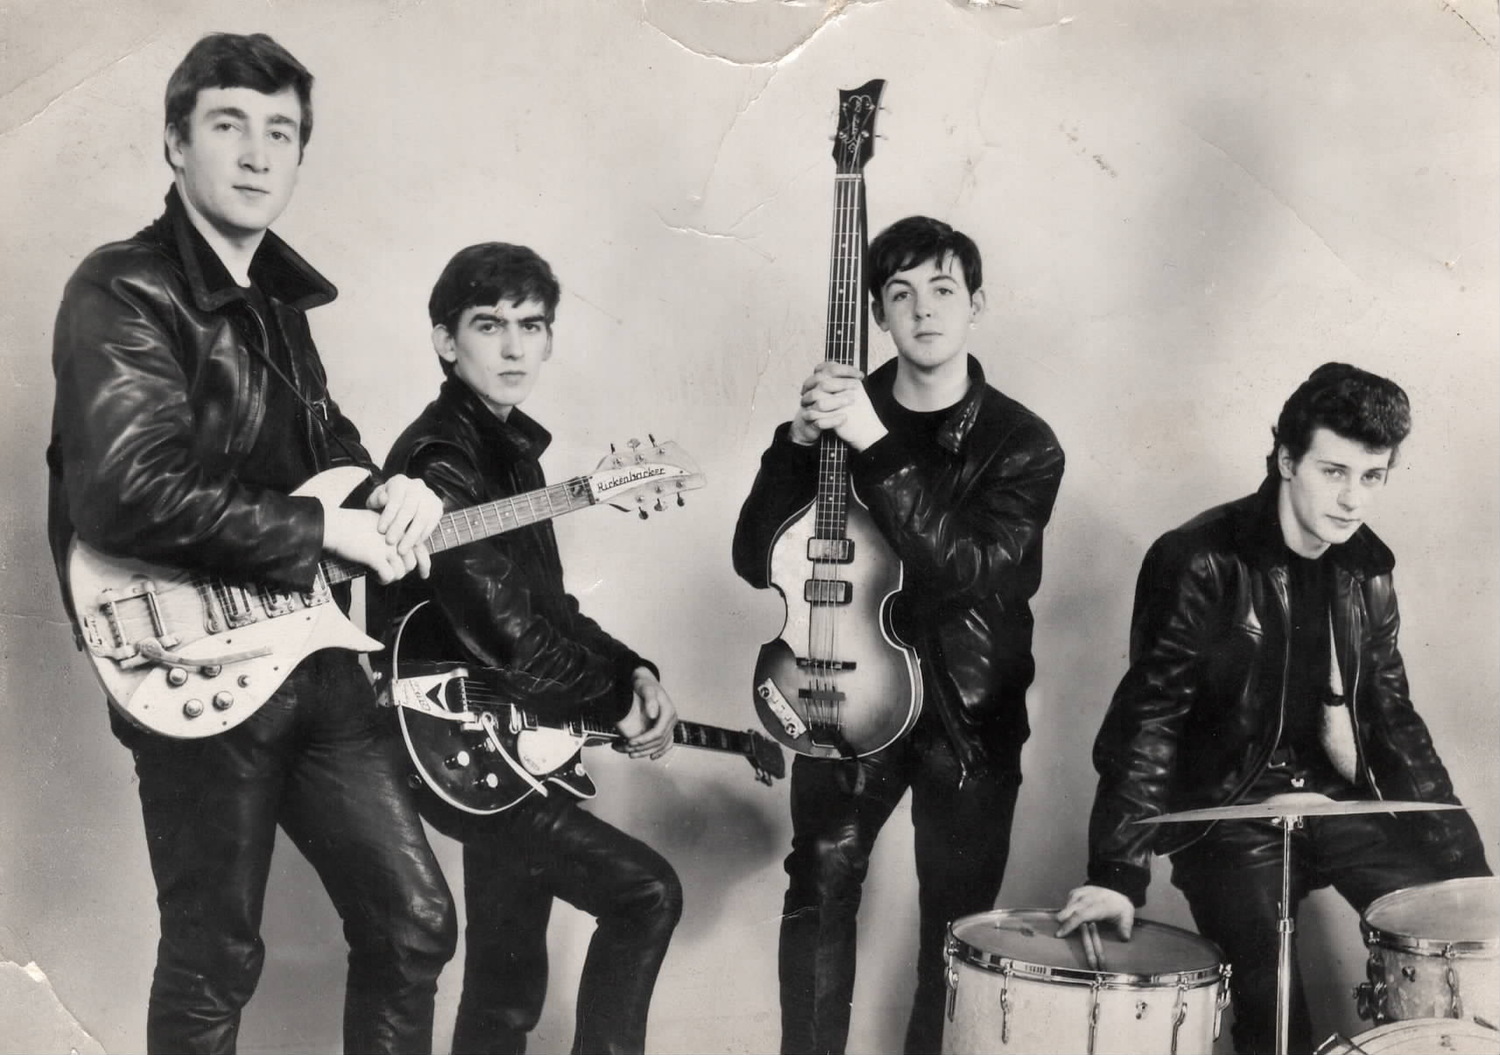 Hilary Collins of Sag Harbor still has this early publicity photo of the Beatles taken by Liverpool photographer Albert Marrion in late 1961. COURTESY HILARY COLLINS